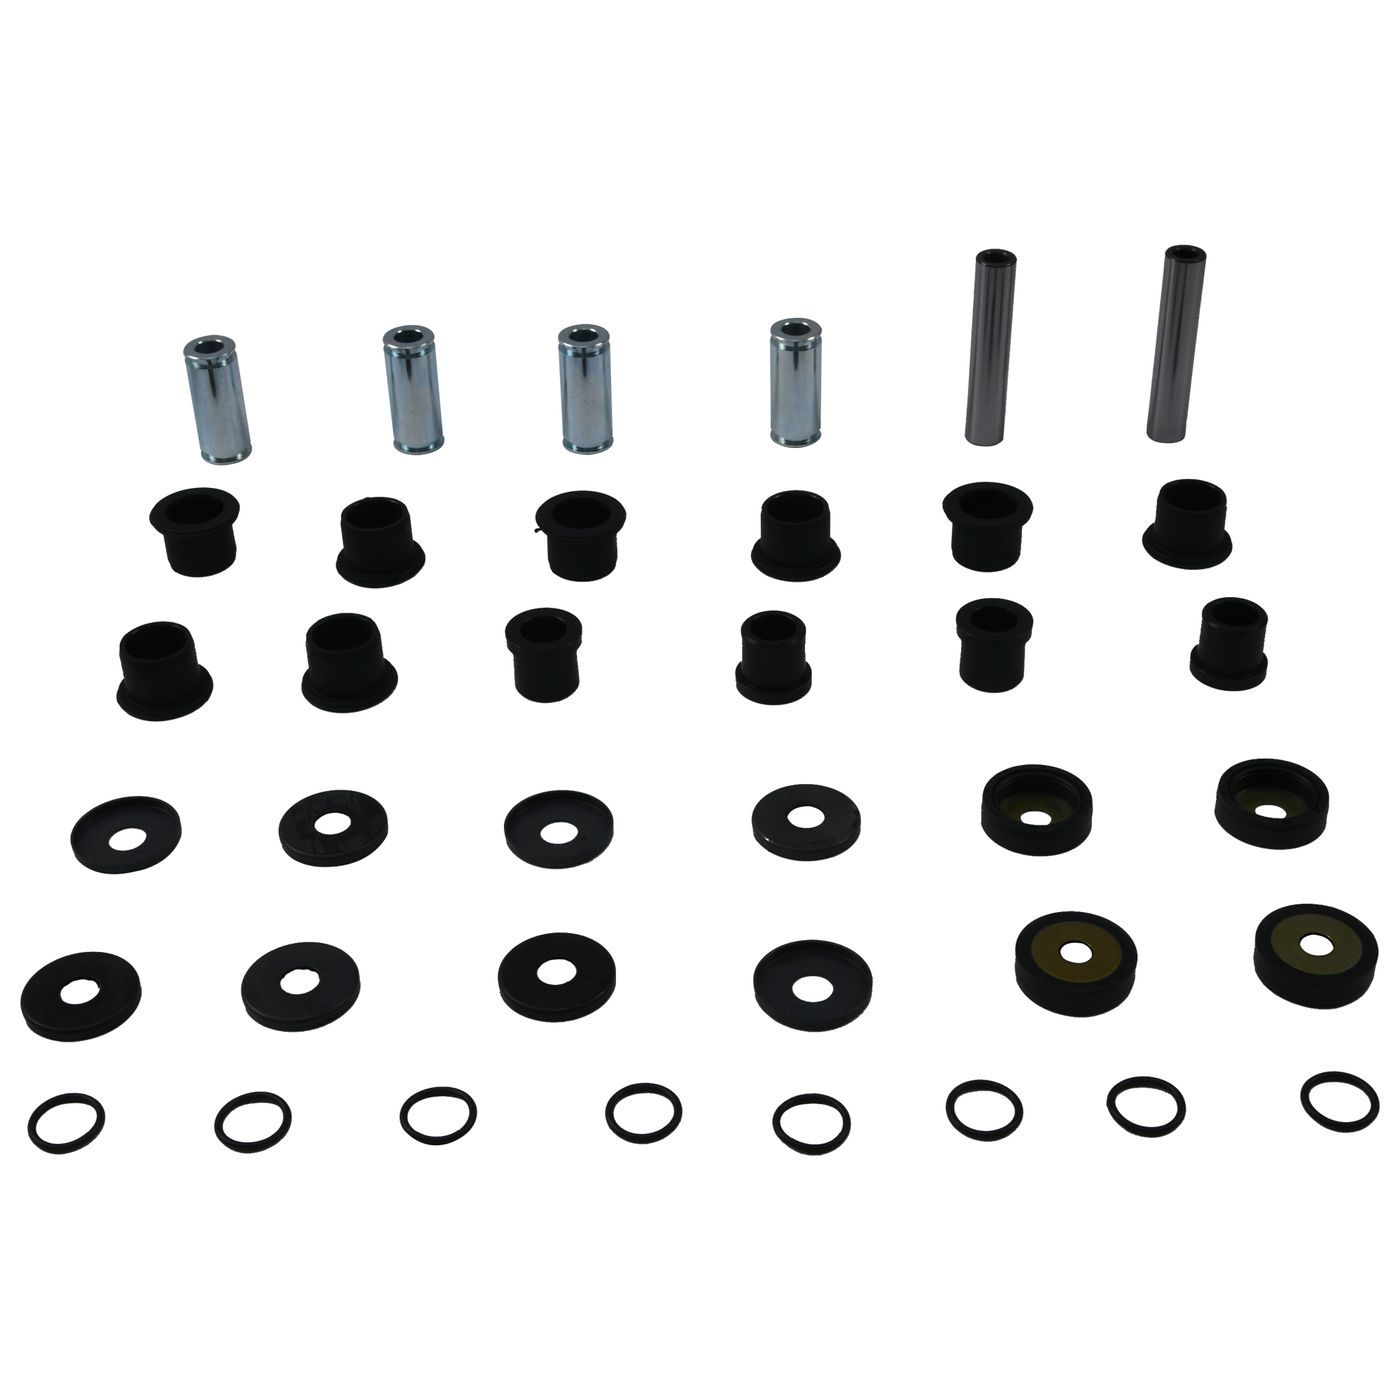 Wrp Rear Ind. Suspension Kits - WRP501226 image